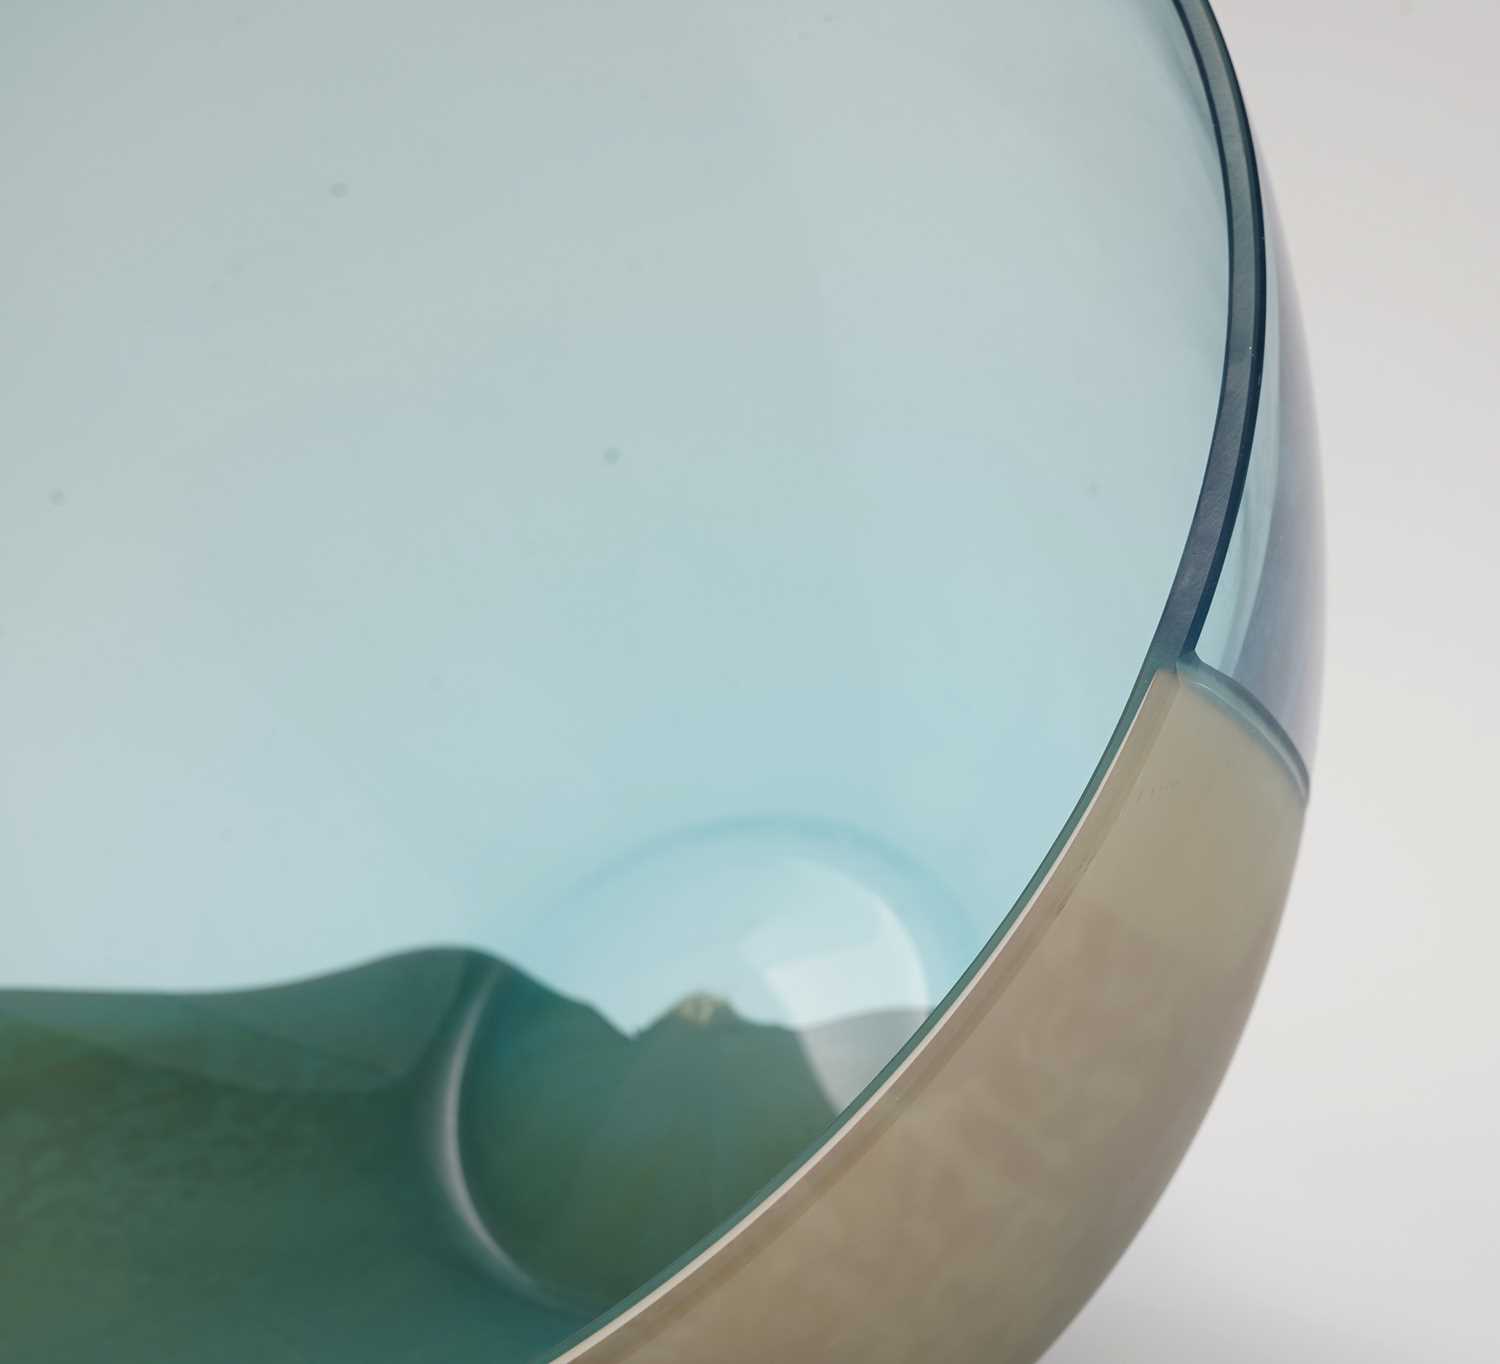 Venini 'Le Sabbie' overlay glass bowl by Claudio Silvestrin - Image 5 of 7